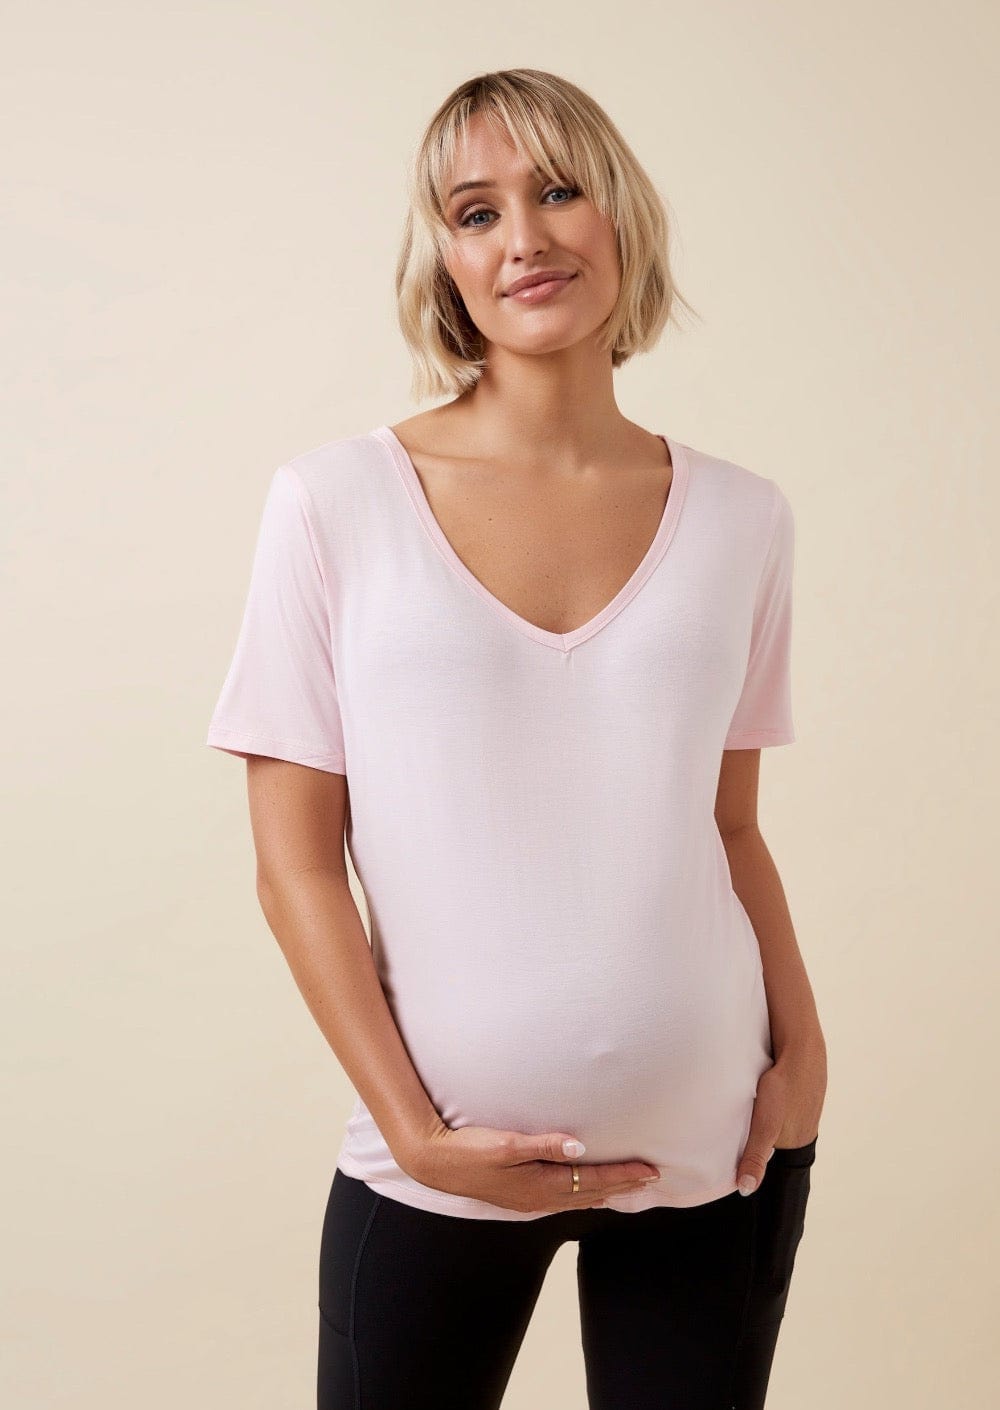 Thery Group TEE Powder Pink The Me Bamboo Slouch Tee  - front view pregnant mother